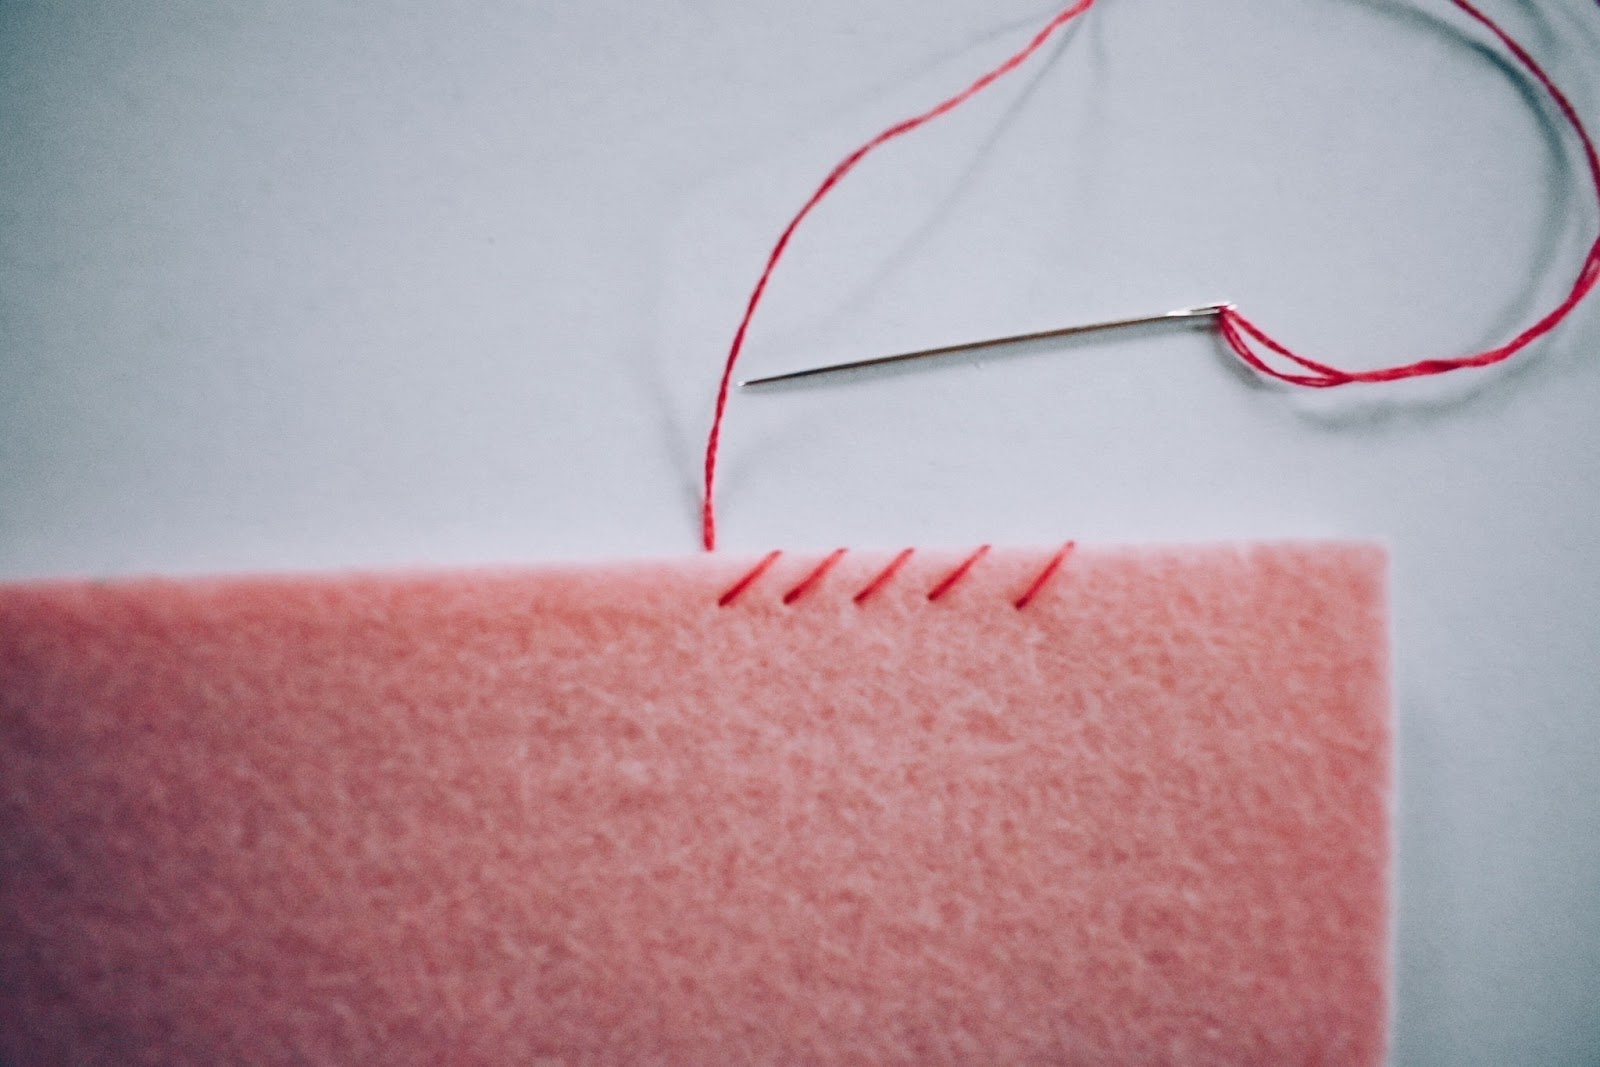 whip stitch sewing for a ripped seam 